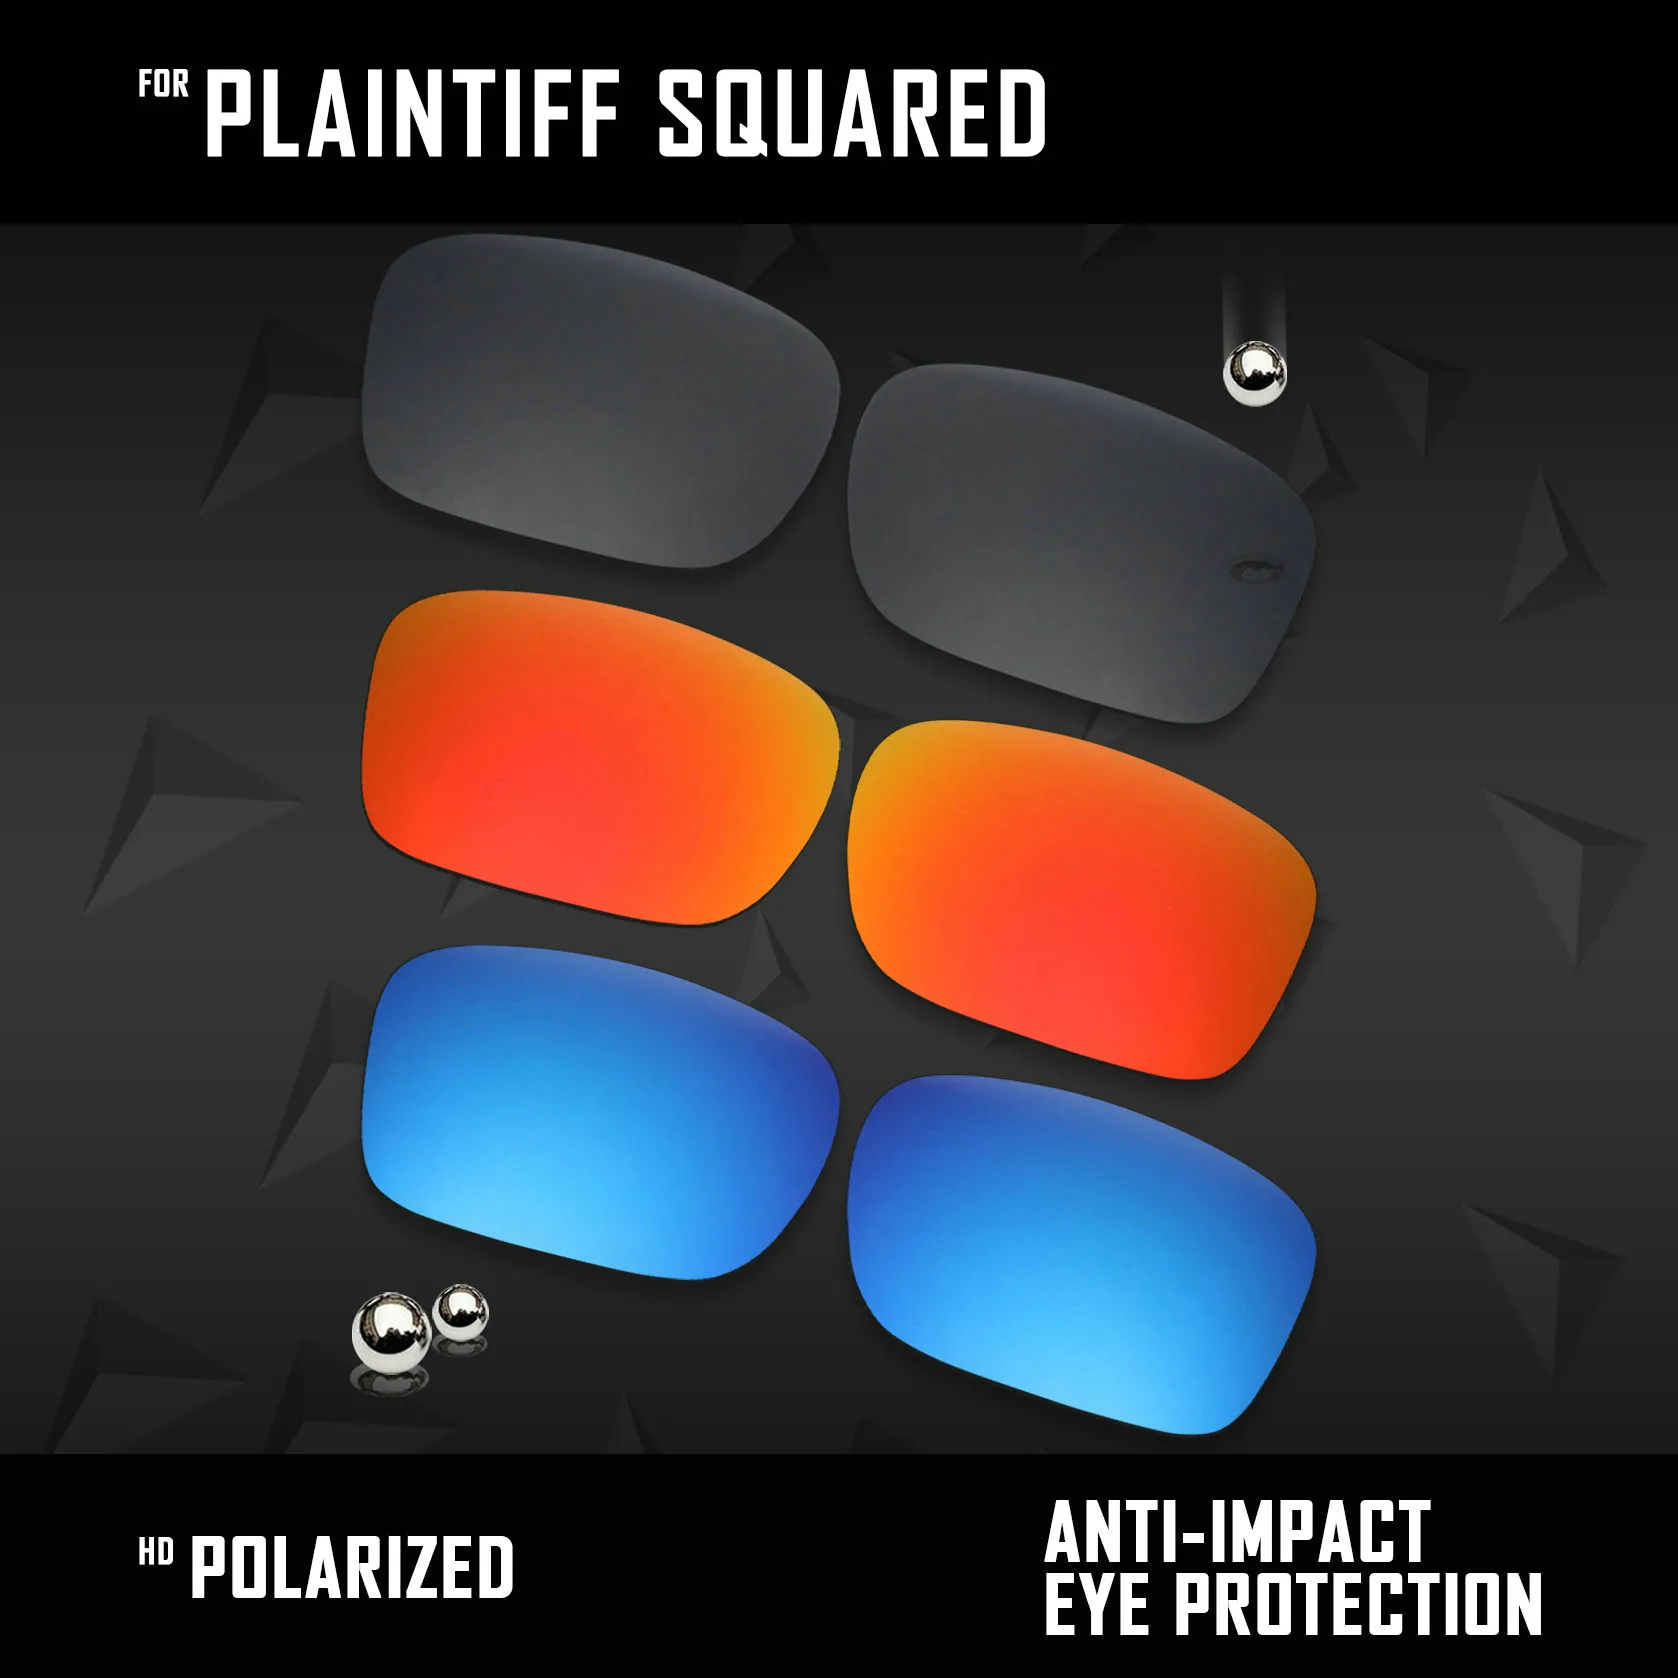 OOWLIT 3 Pairs Polarized Sunglasses Replacement Lenses for Oakley Plaintiff Squared OO4063-Black & Fire Red & Ice Blue